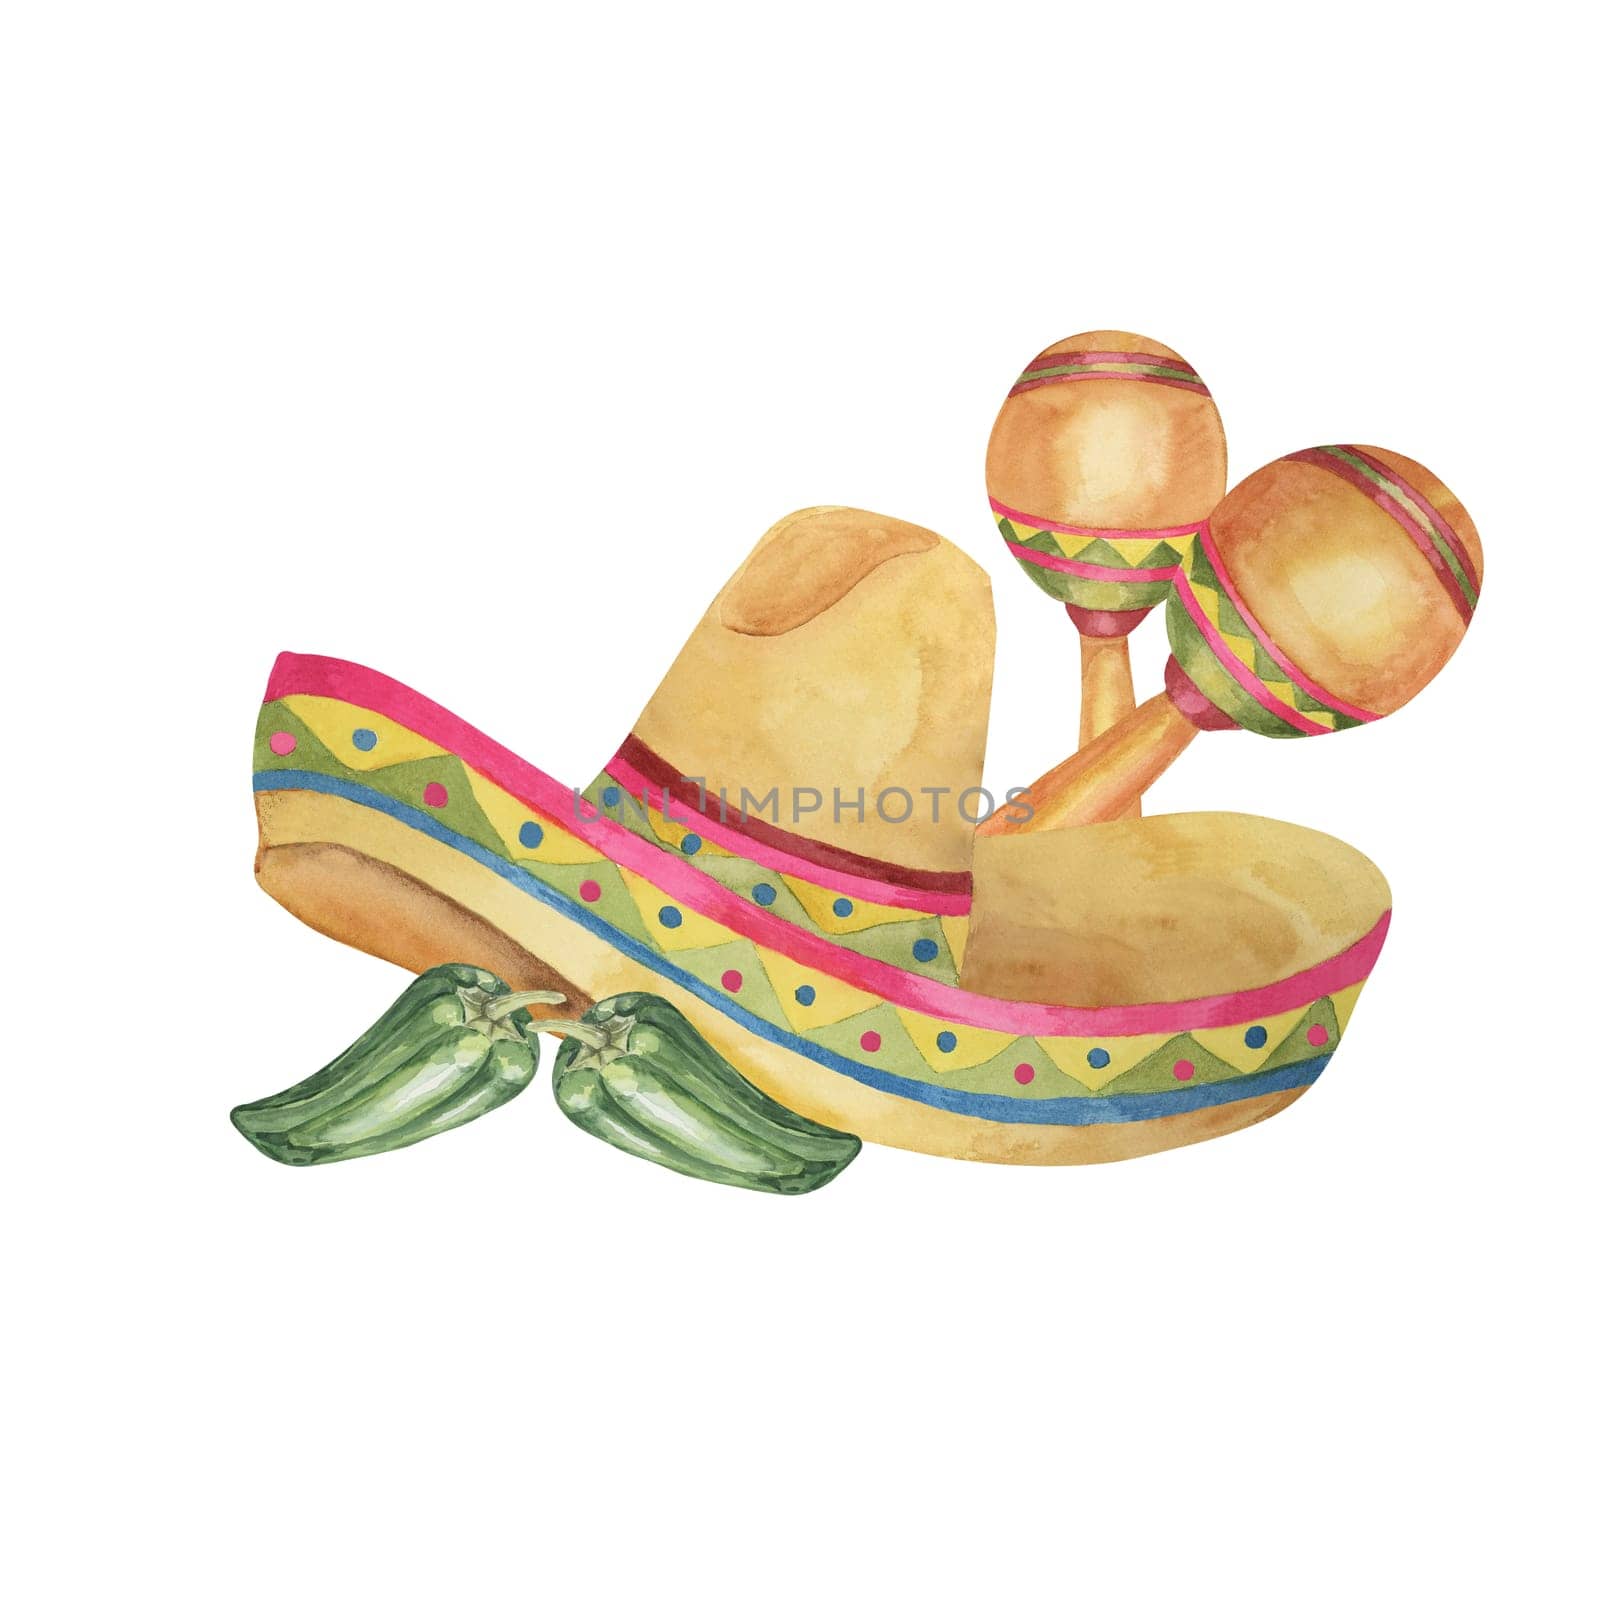 Sombrero hat with maracas and jalapeno peppers by Fofito